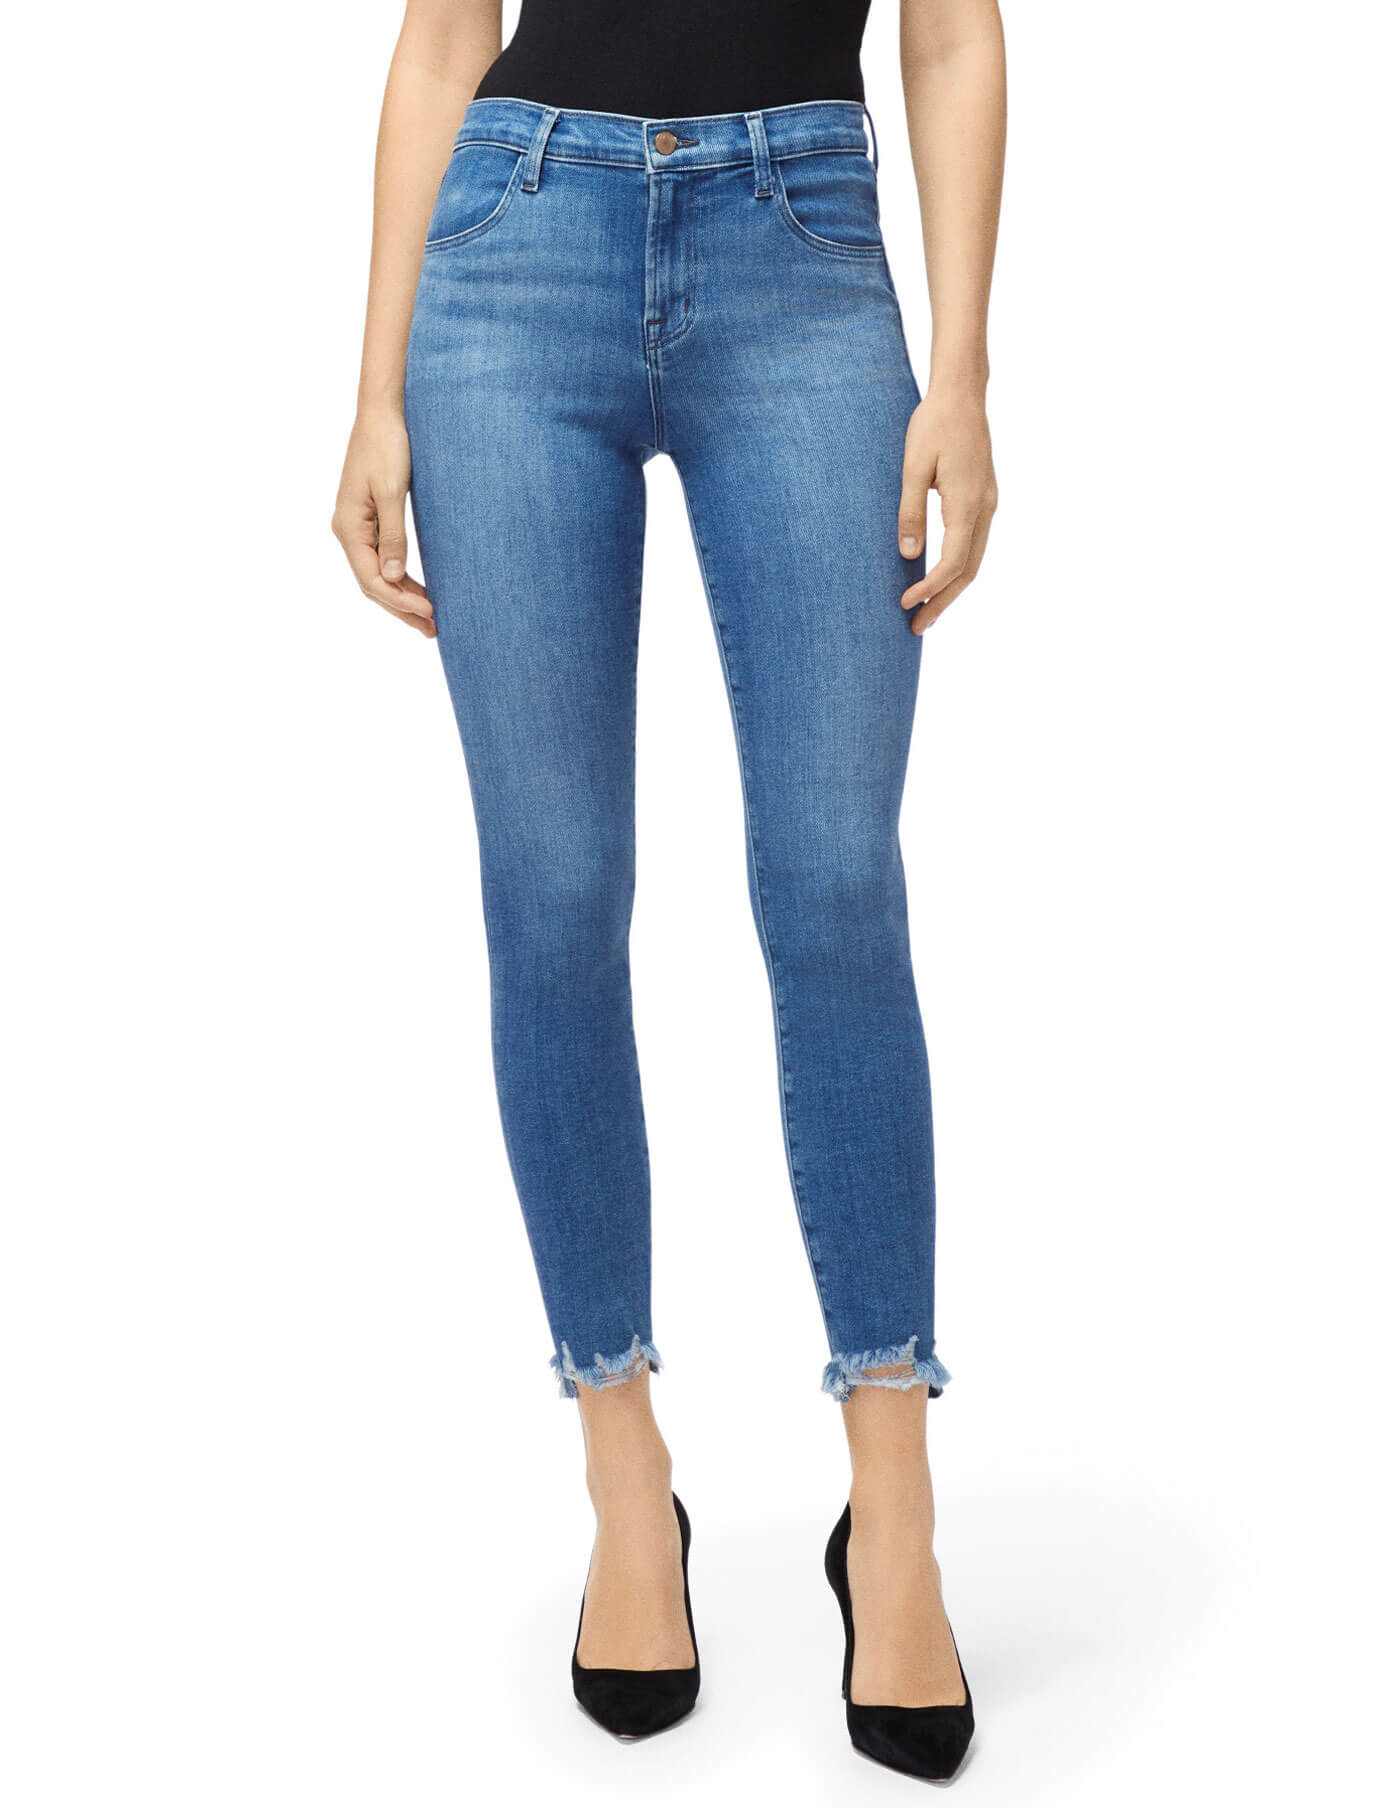 JBRAND High Rise Jeans In True Love Destruct at Storm Fashion